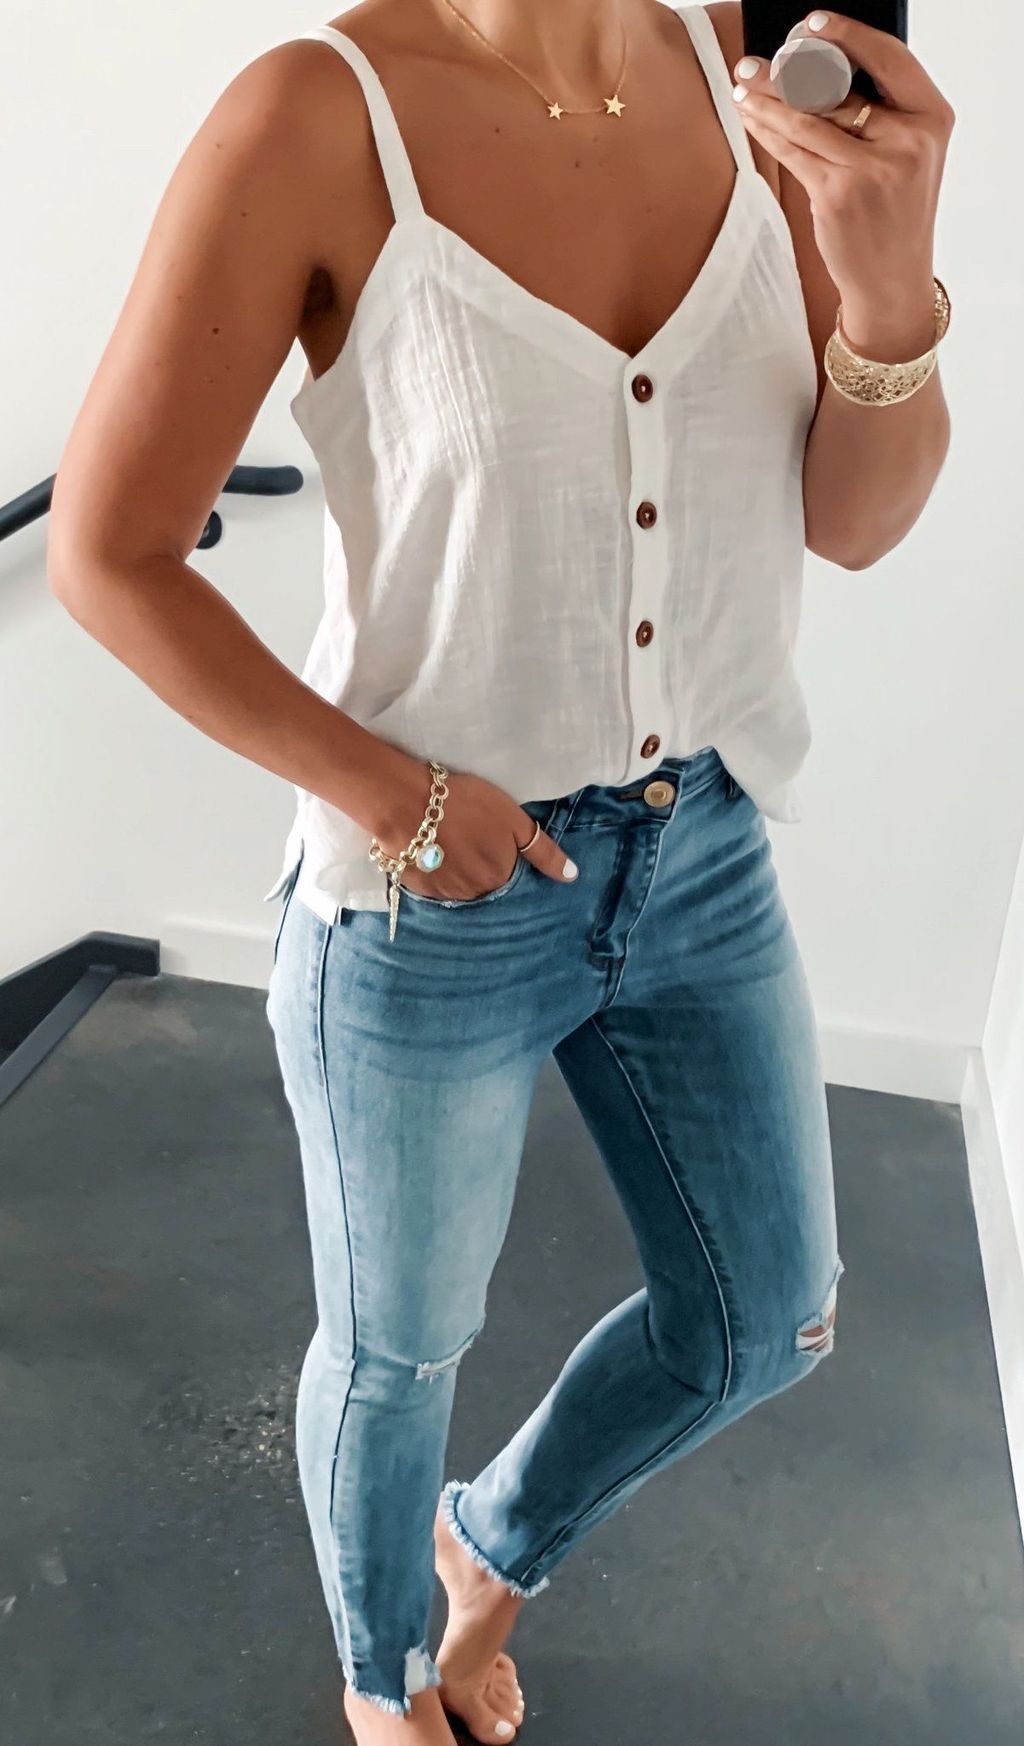 37 Hottest Women Summer Outfits Ideas With Ripped Jeans To Try